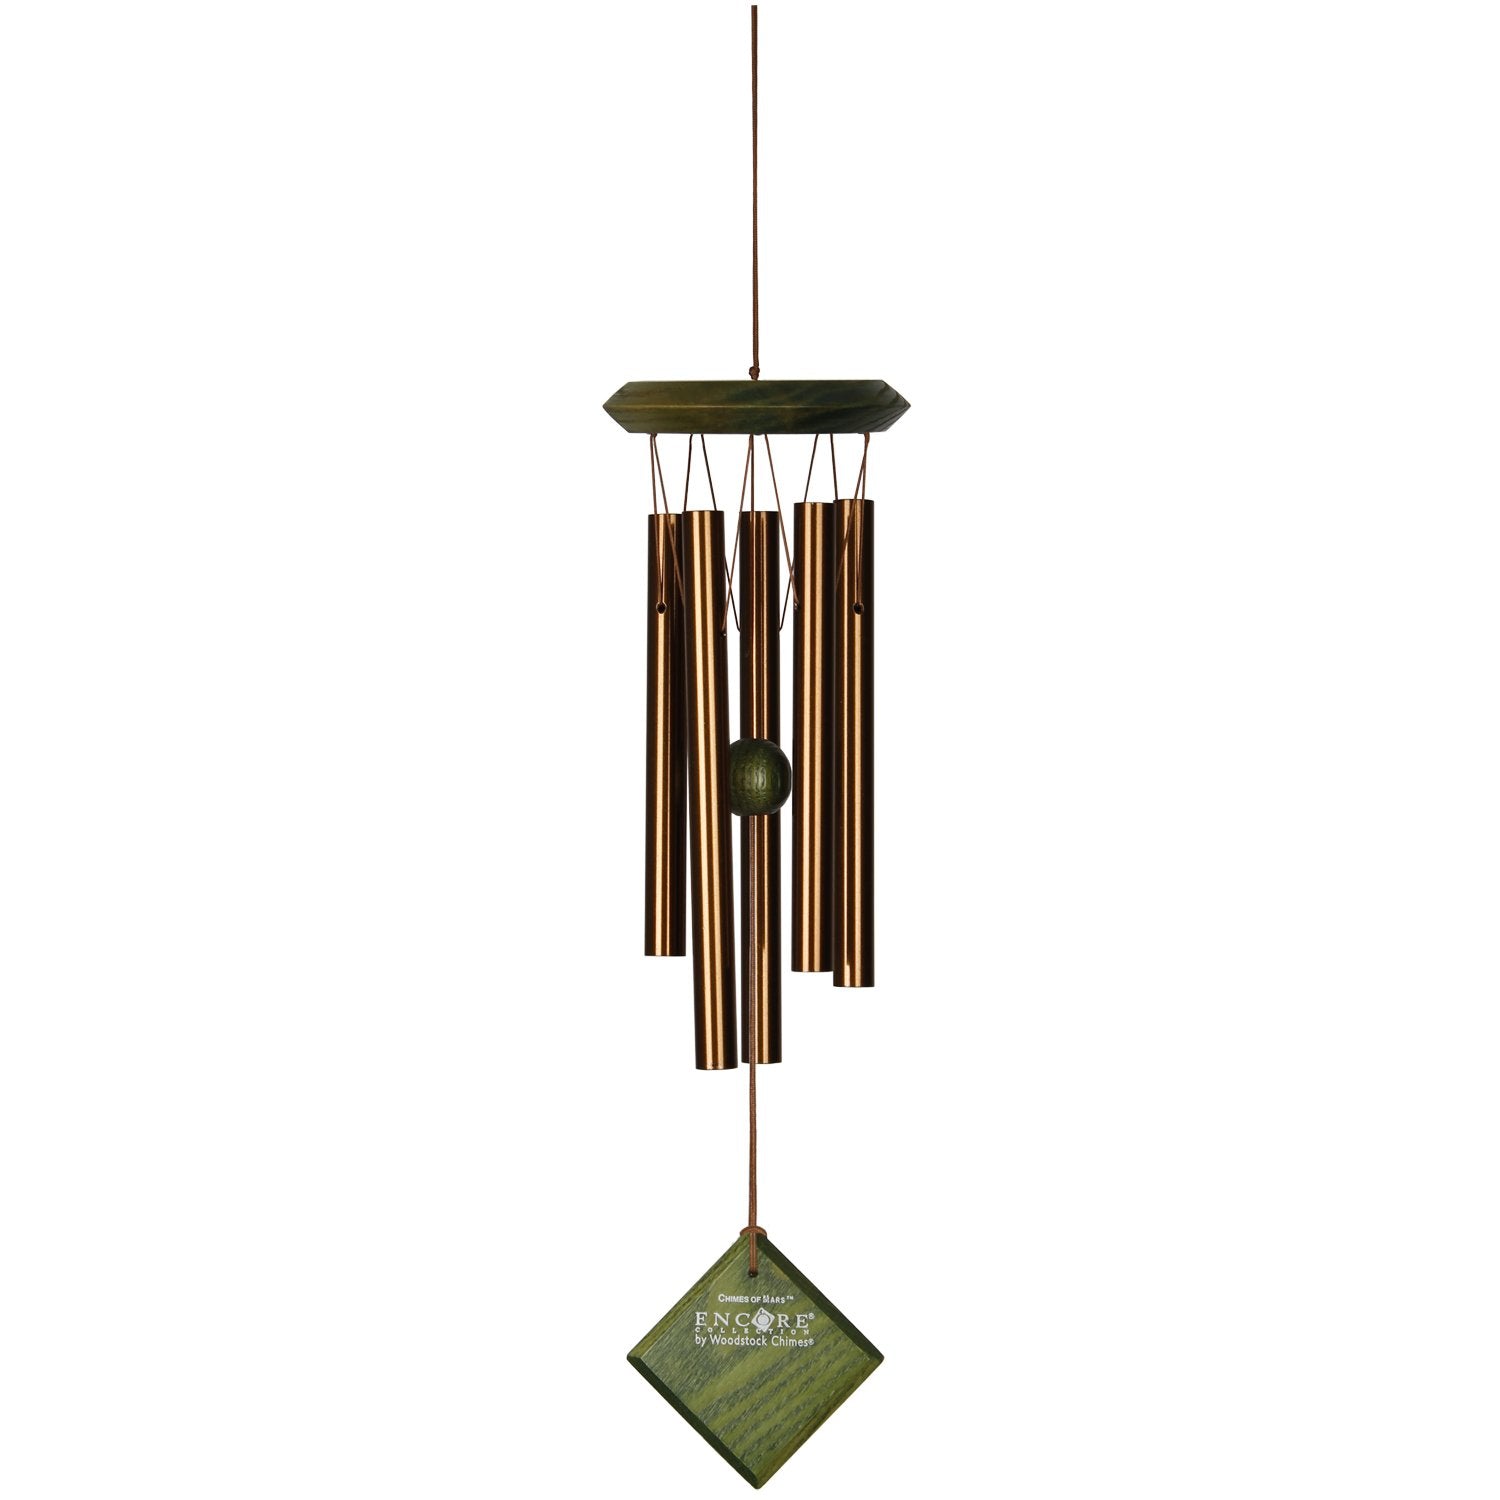 Encore Chimes of Mars - Green Wash full product image